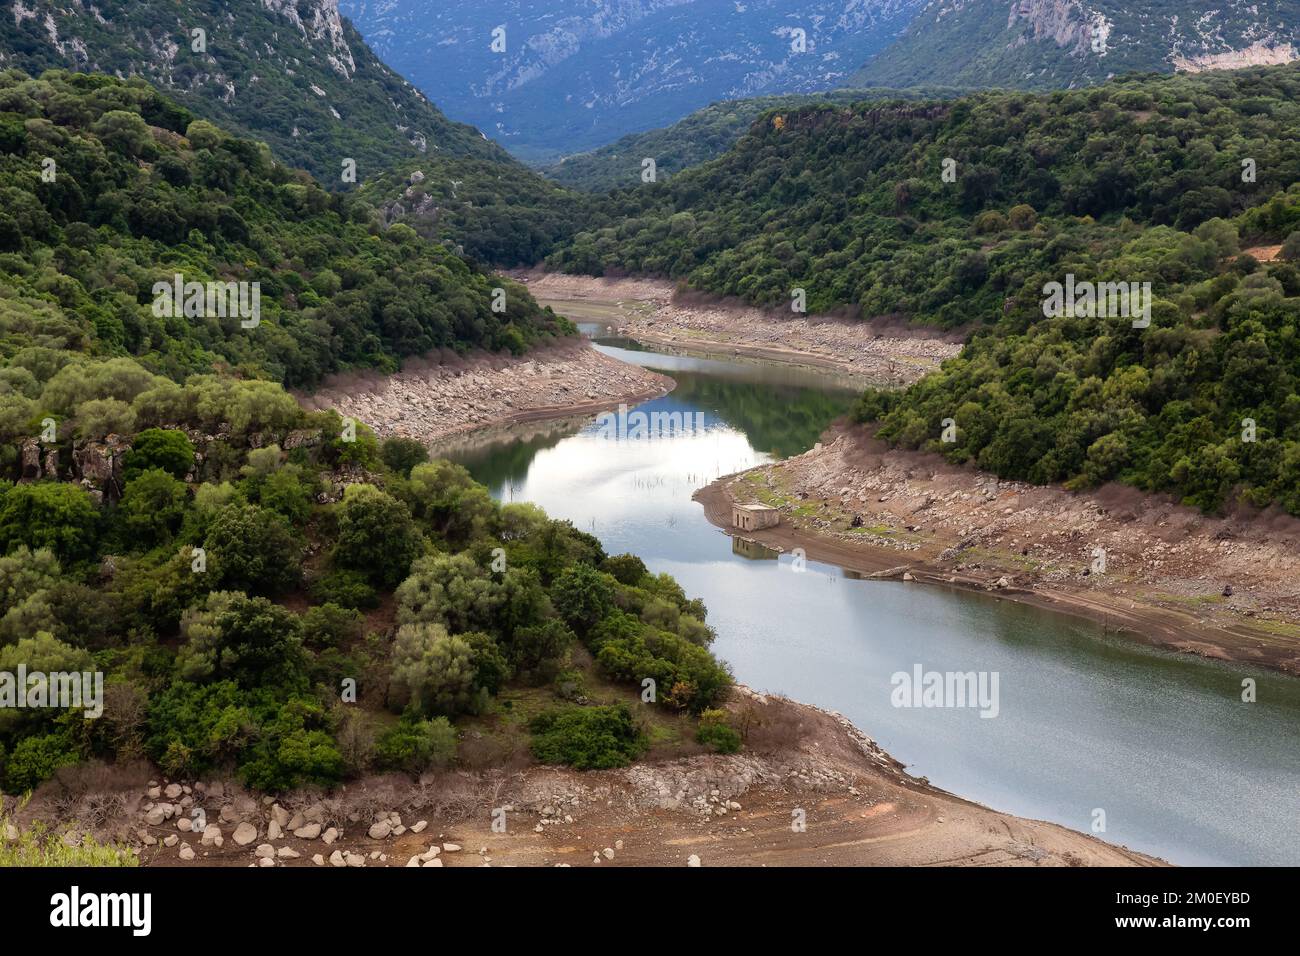 River and Mountain Landscape Nature Background. Sardinia, Italy Stock Photo